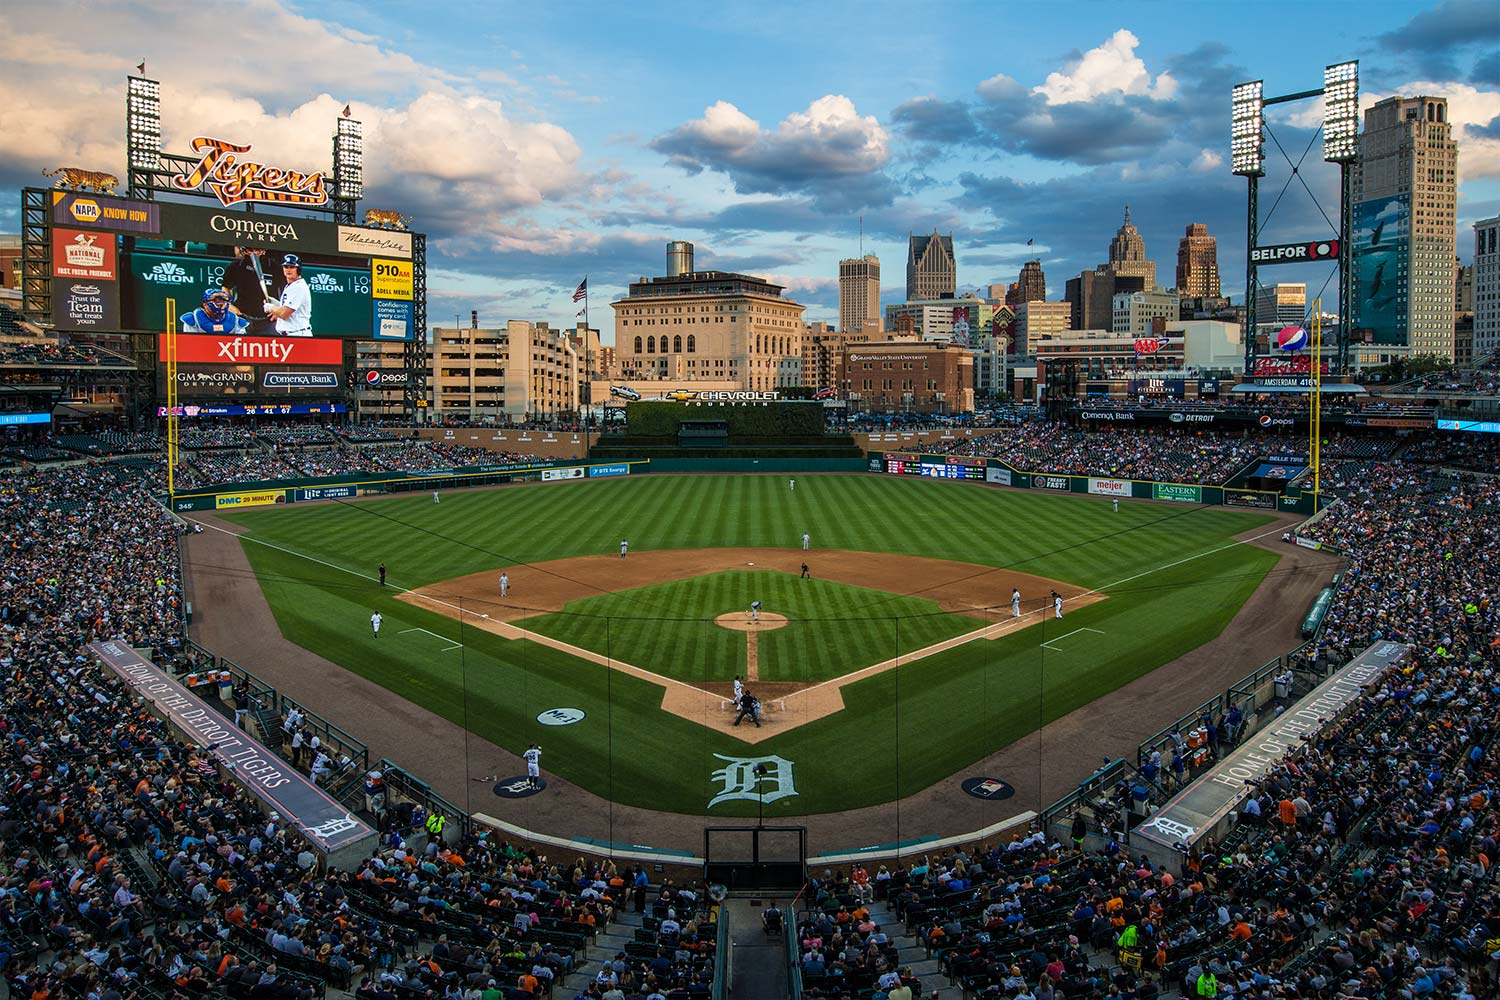 The Henry Hotel near Comerica Park: Sporting Events & Concerts